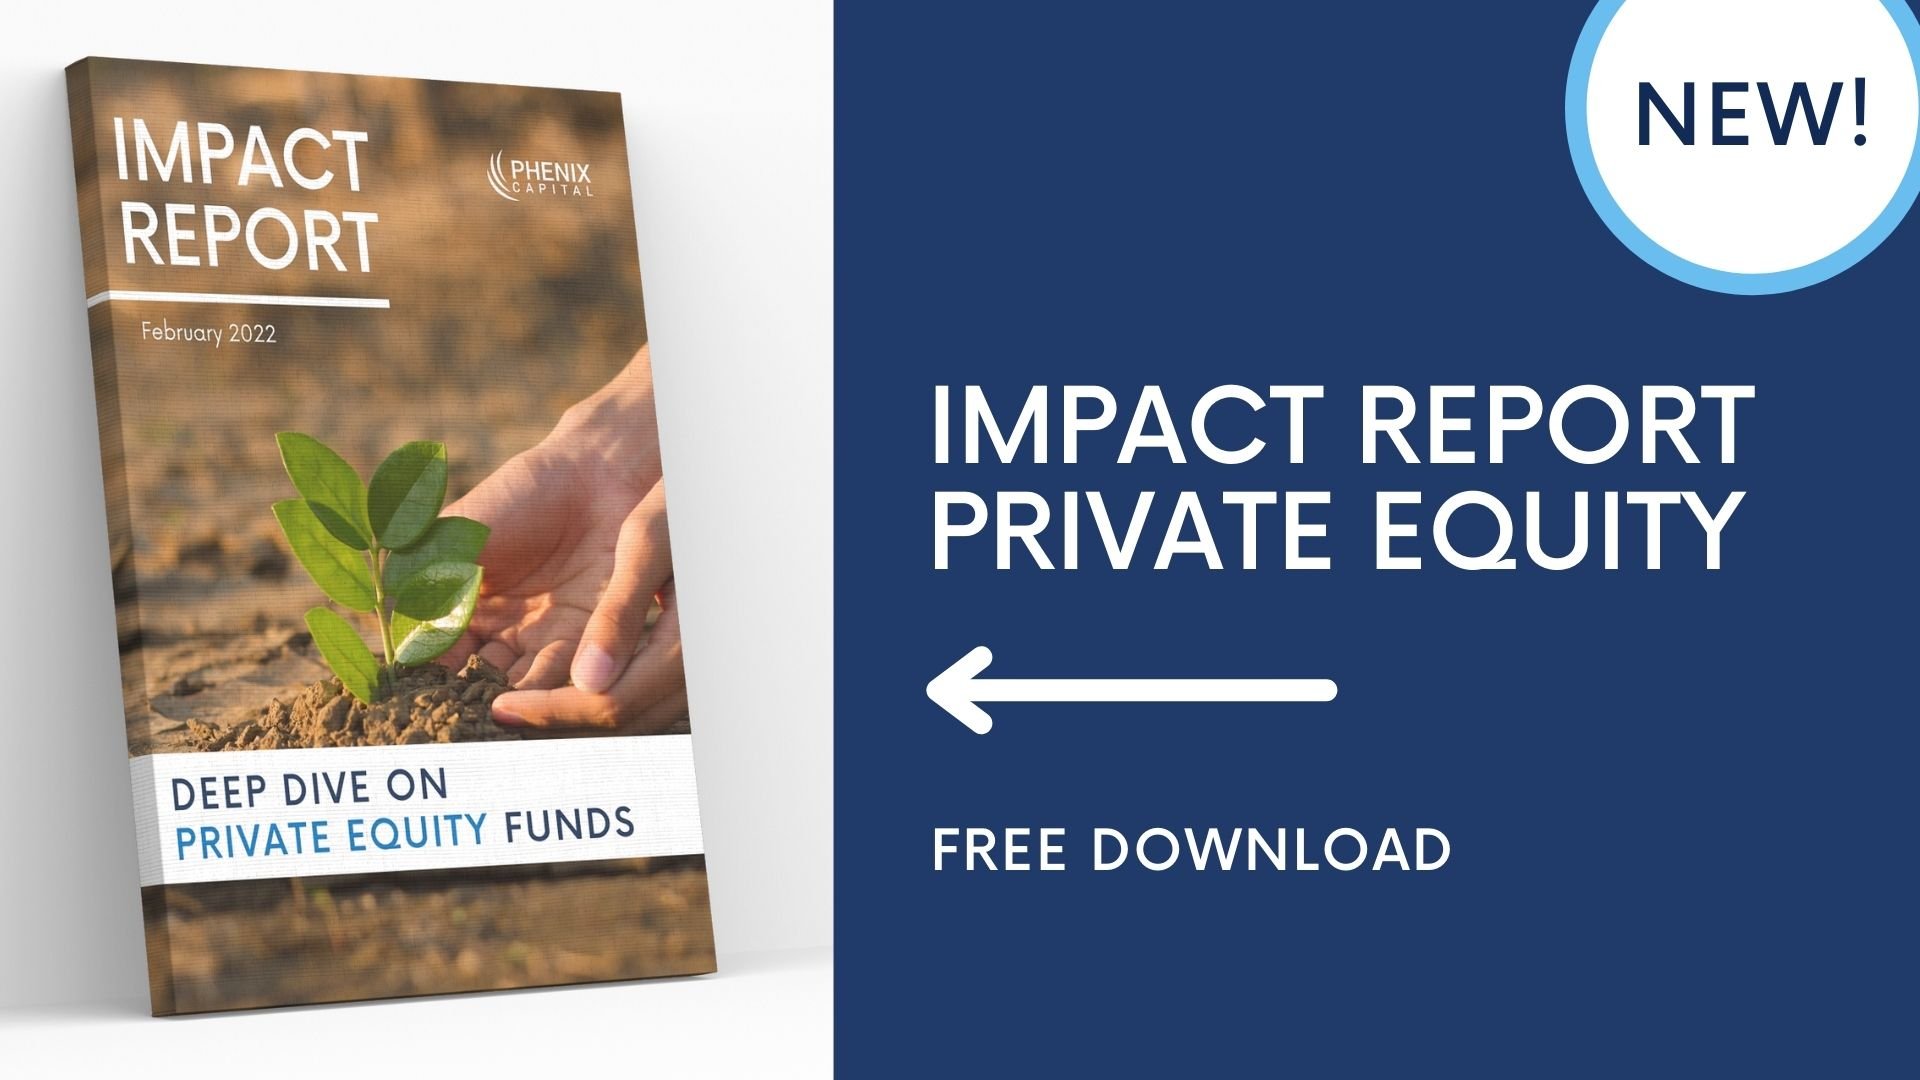 PRESS RELEASE: More than €136 billion has already been committed towards Private Equity funds